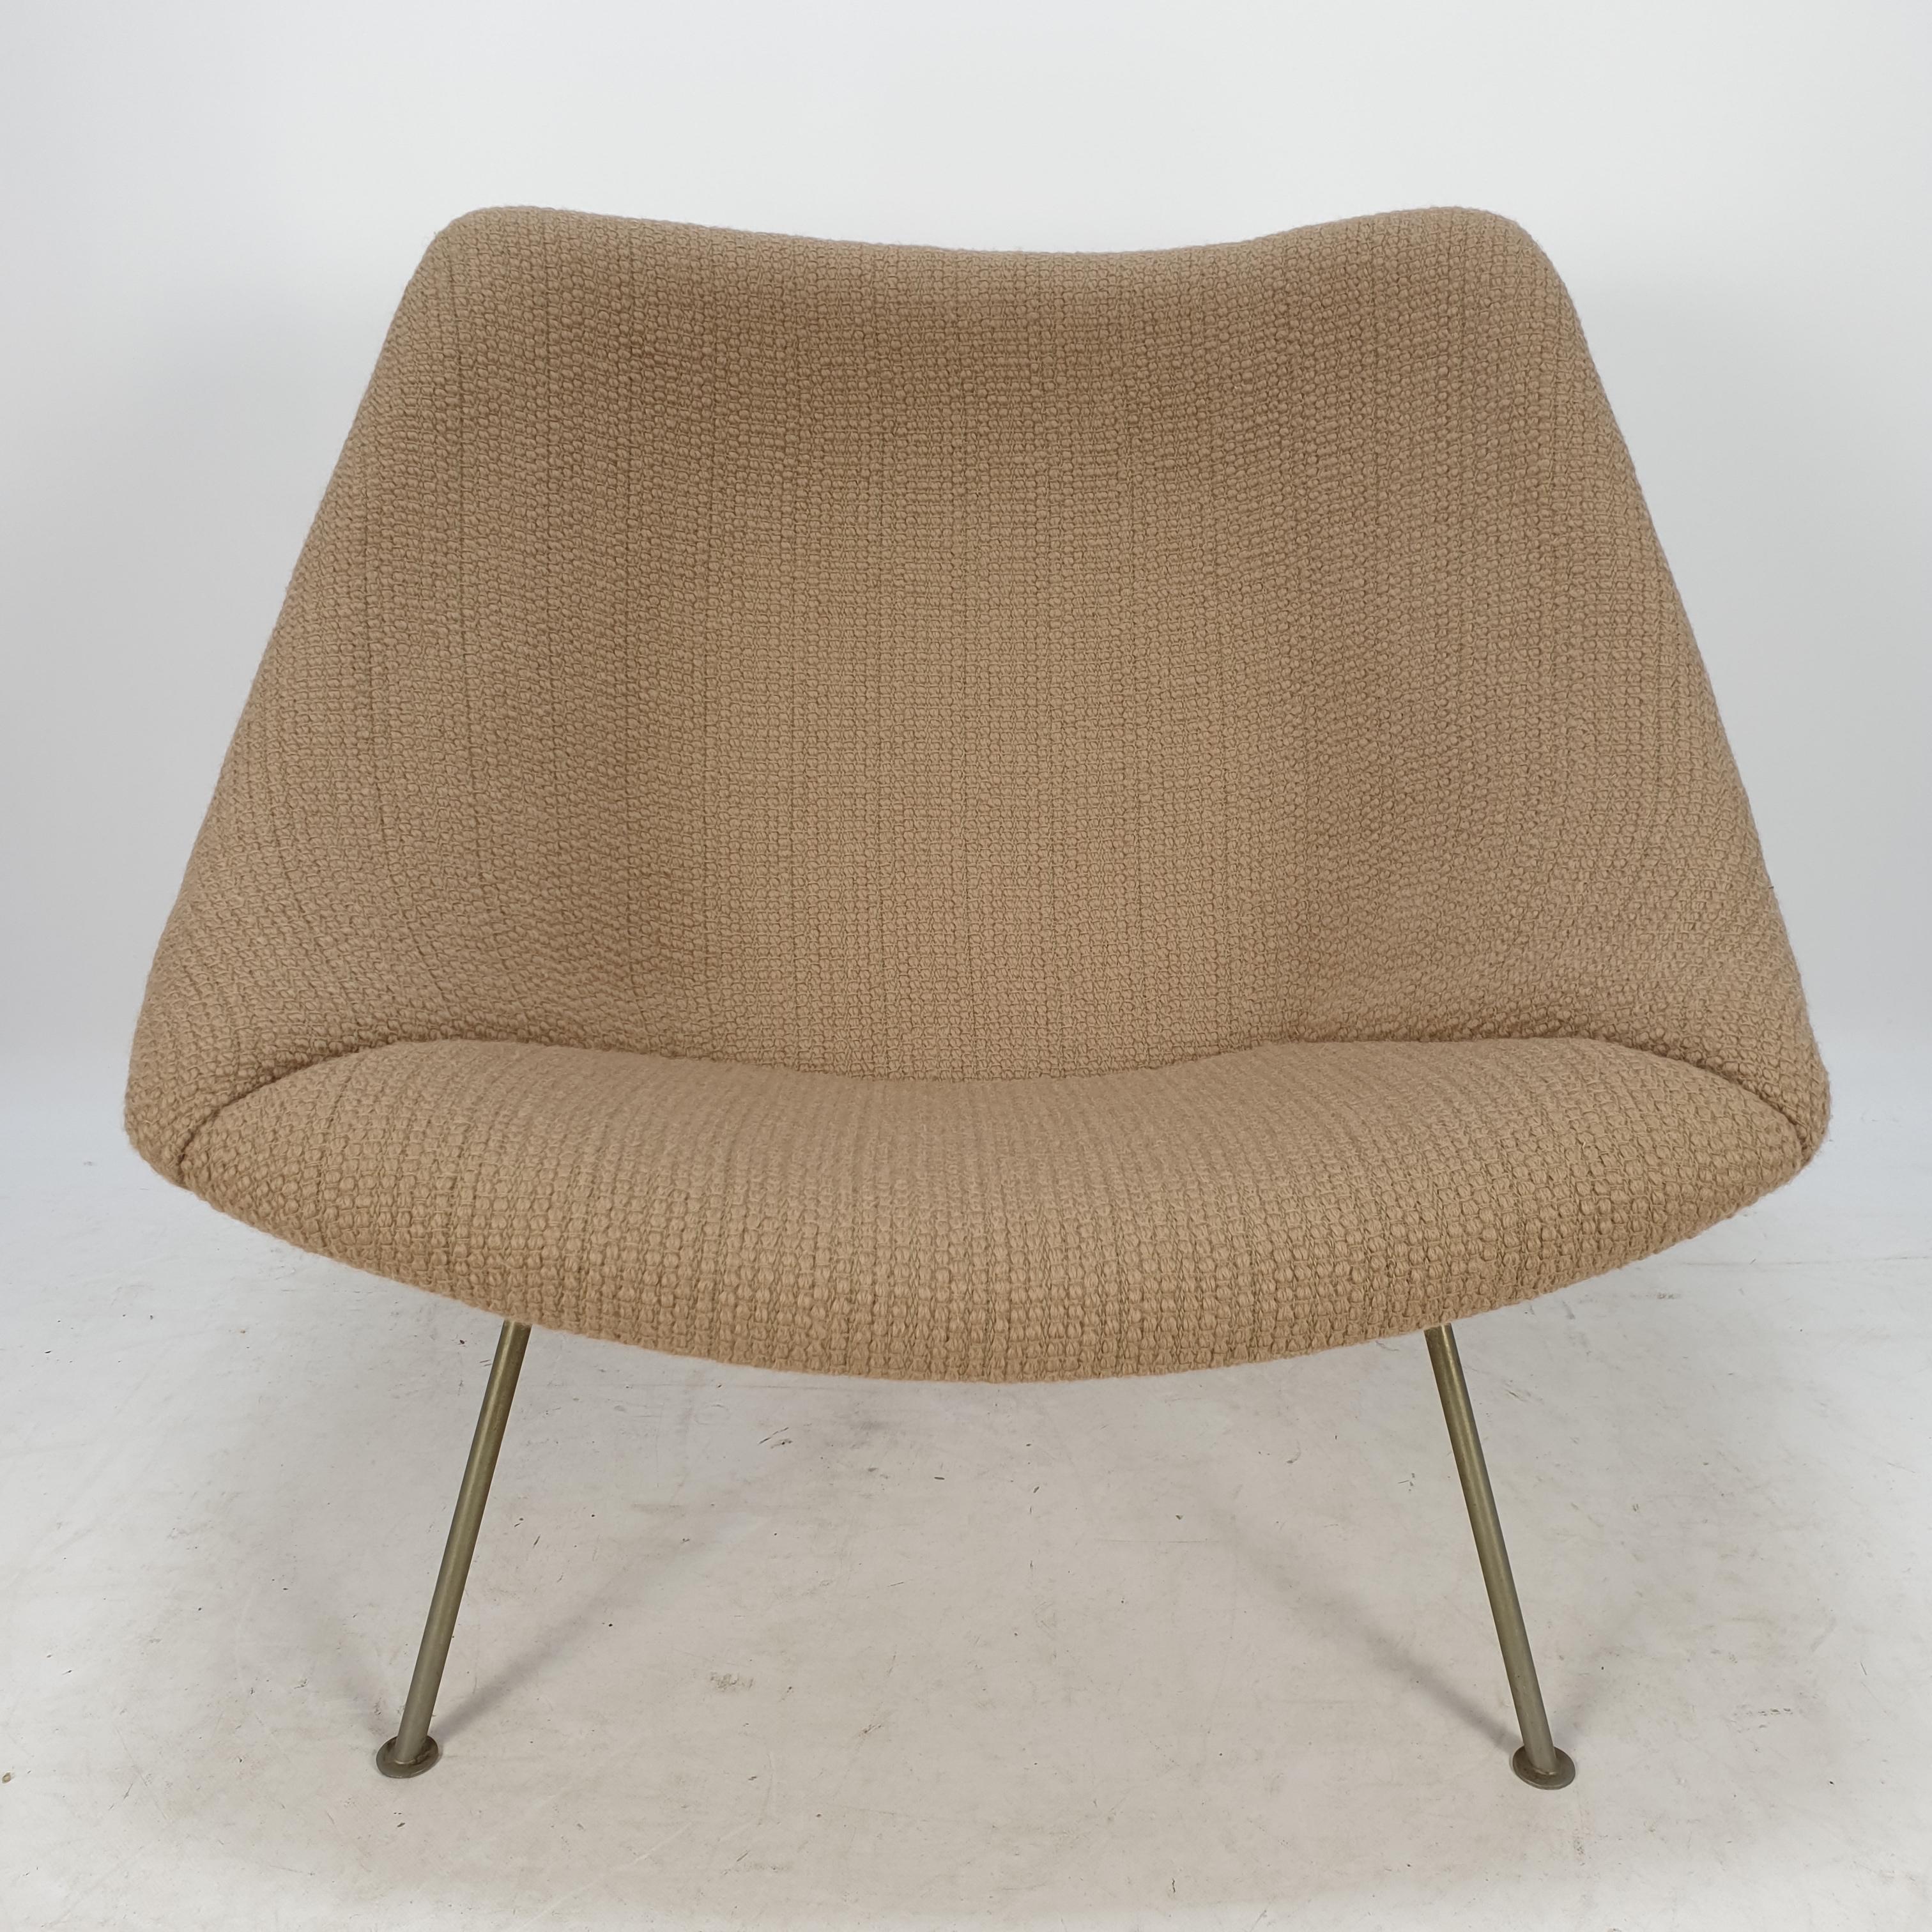 The famous Oyster chair by Pierre Paulin for Artifort.
Designed in the beginning of the 60's. 
This female edition has been made just for a few years!

This chair is very comfortable.

The chair is in very good condition, it is just